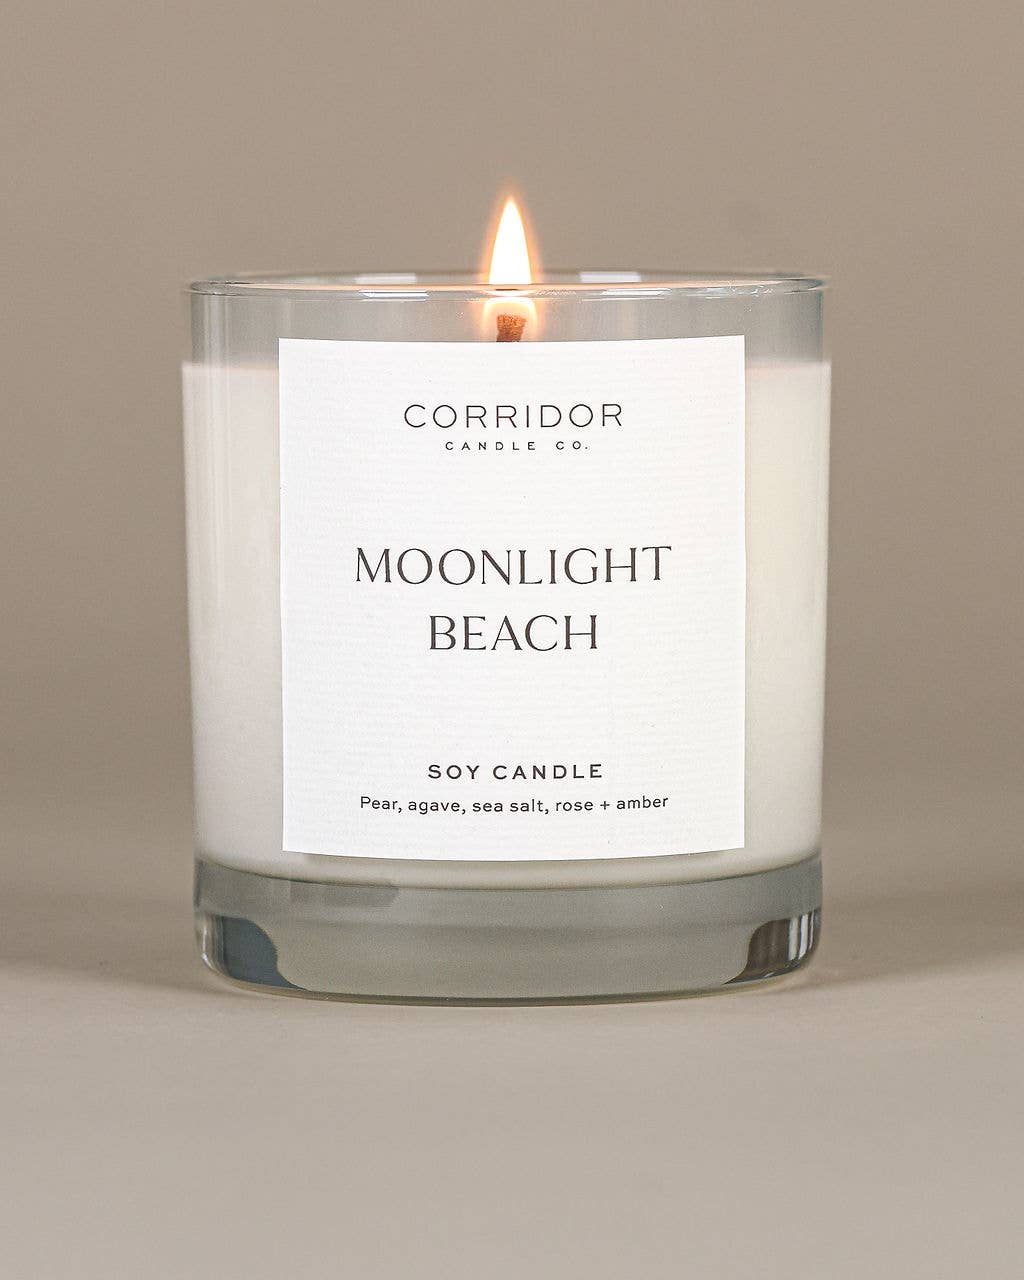 Moonlight Beach Soy Candle